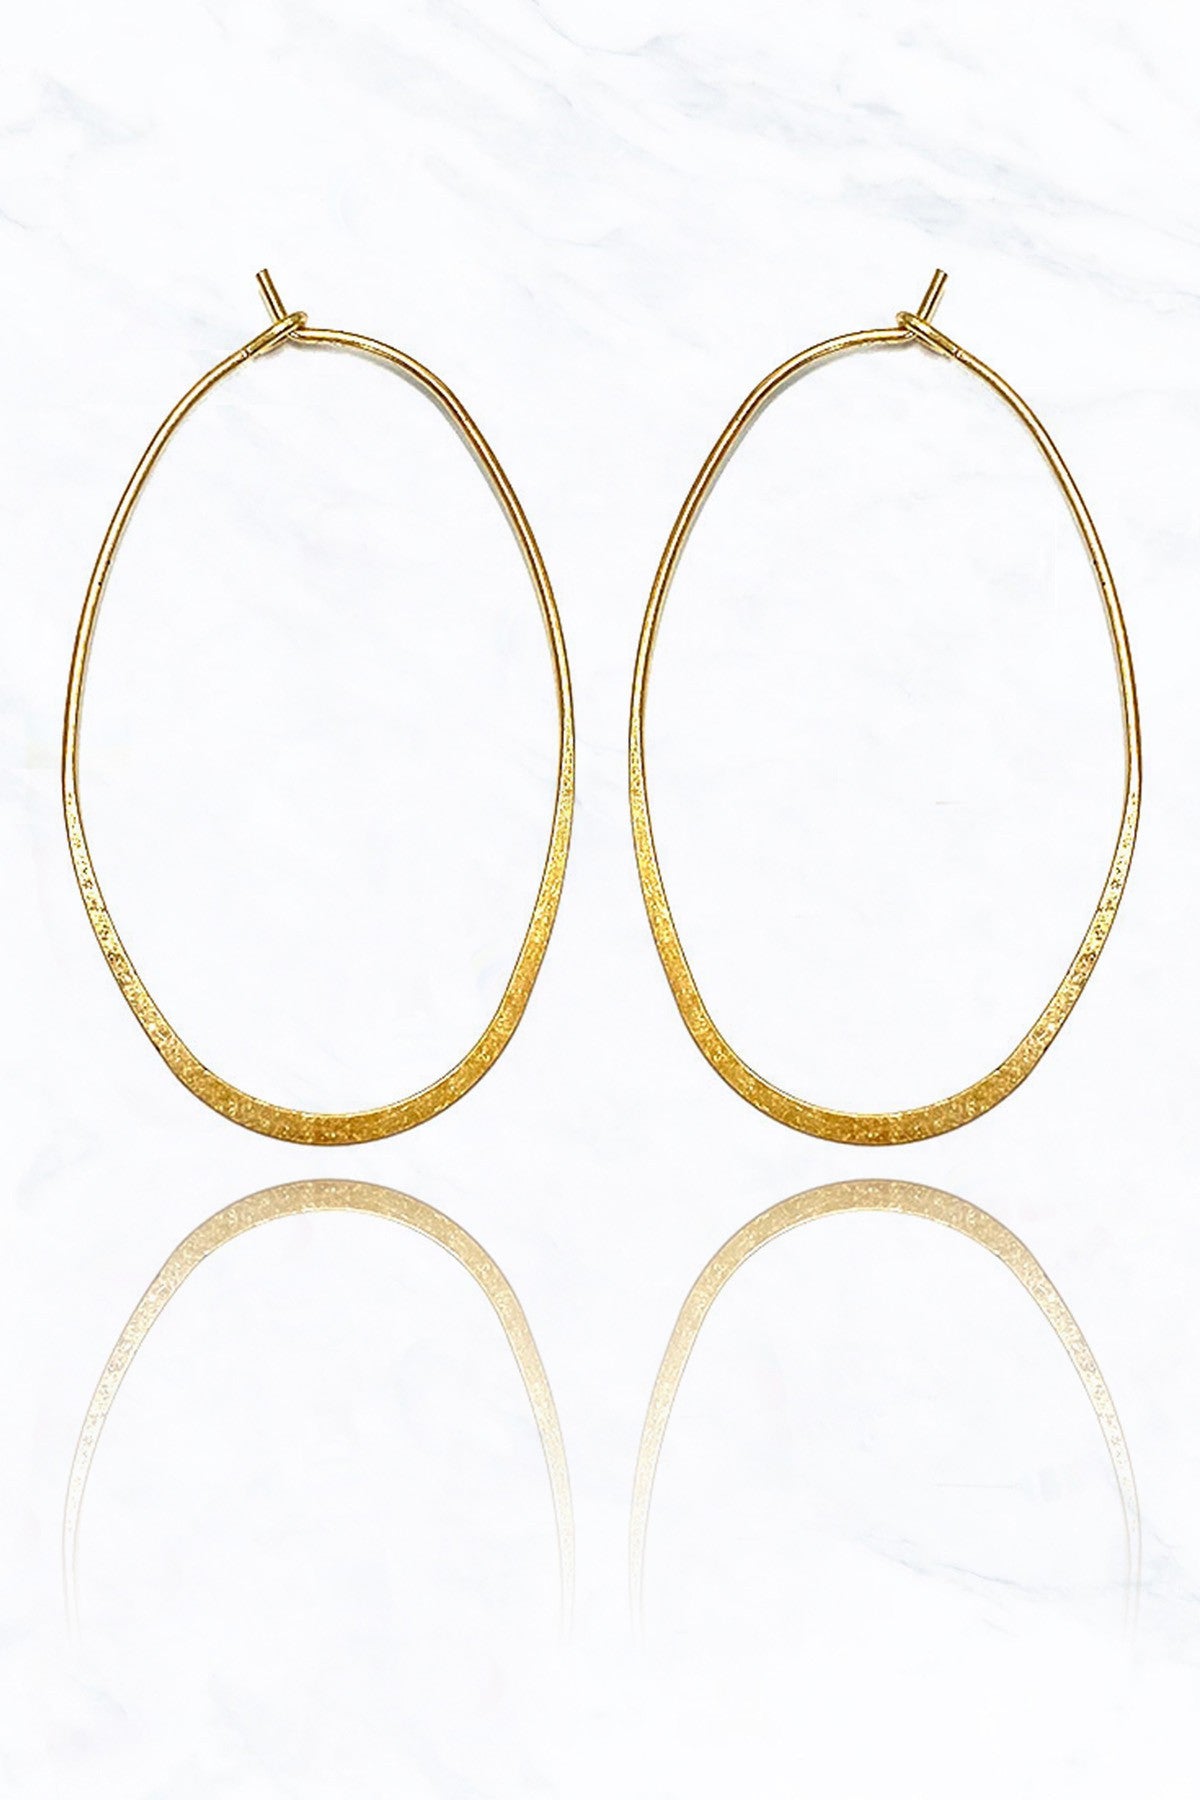 Hammered Gold Oval Hoop Earring